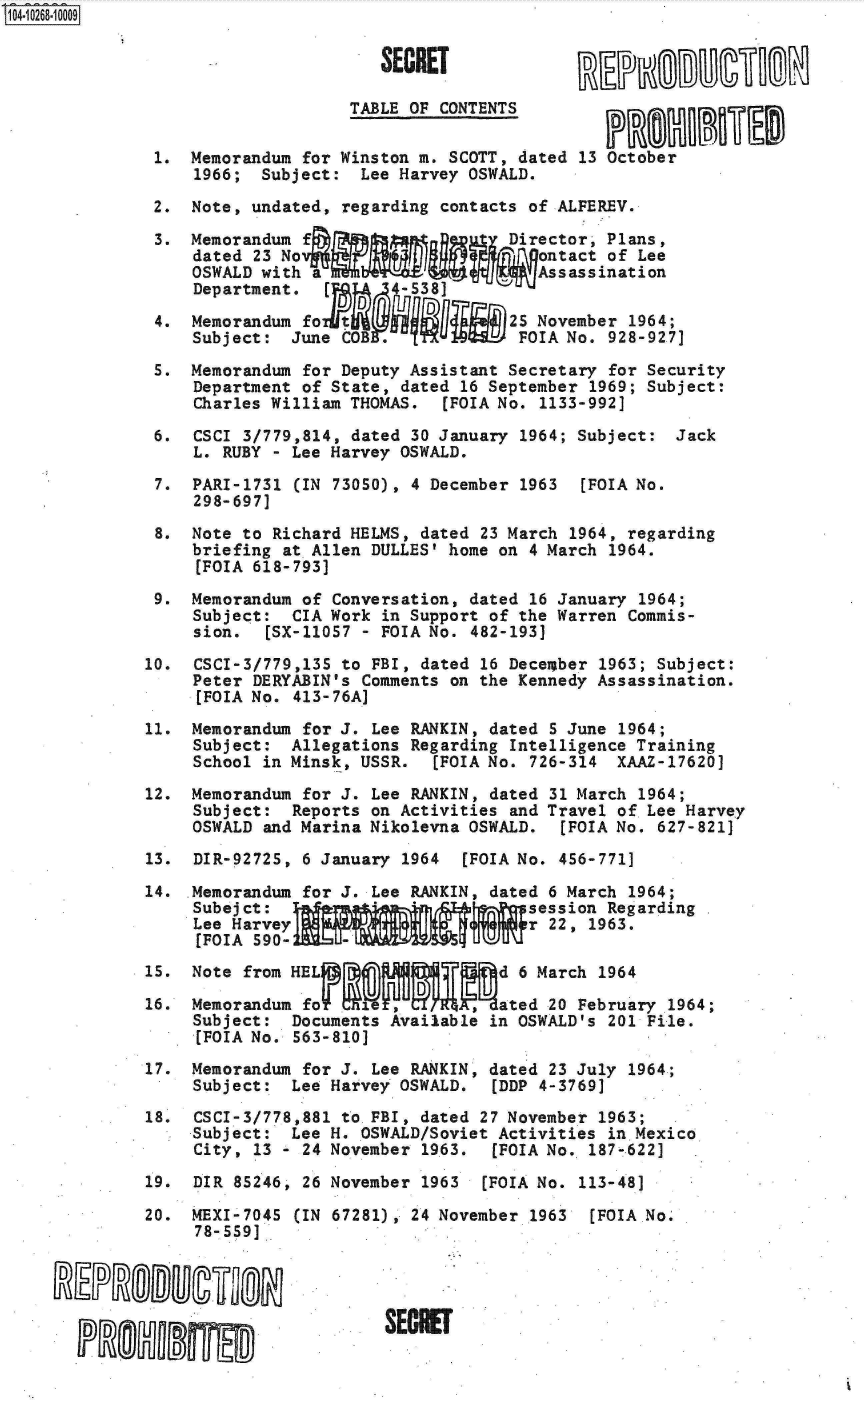 handle is hein.jfk/jfkarch06600 and id is 1 raw text is: 104-10268-10009


                                     SECRET

                                  TABLE OF CONTENTS


               1. Memorandum for Winston m. SCOTT, dated 13 October
                   1966; Subject:  Lee Harvey OSWALD.

               2. Note, undated, regarding contacts of ALFEREV.

               3. Memorandum fD                             Plans,
                   dated :23 No                 ~ontact of Lee
                   OSWALD with ara                   Assassination
                   Department.        4-538]

               4. Memorandum f                       November 1964;
                  Subject:  June COB .             FIA  No, 928-92.7]

               5. Memorandum for Deputy Assistant Secretary for Security
                   Department of State, dated 16 September 1969; Subject:
                   Charles William THOMAS.  [FOIA No. 1133-992]

               6.  CSCI 3/779,814, dated 30 January 1964; Subject: Jack
                   L. RUBY - Lee Harvey OSWALD.

               7, PARI-1731  (IN 73050) , 4 December 1963 [FOIA No.
                   298- 697]

               8. Note to Richard HELMS, dated 23 March 1964, regarding
                  briefing at.Allen DULLES' home on 4 March 1964.
                  [FOIA  618-793]

               9. Memorandum of Conversation, dated 16 January 1964;
                   Subject: CIA Work in Support of the Warren Commis-
                   sion.  [SX-110S7 - FOIA No. 482-193]

              10.  CSCI-3/779,13S to FBI, dated 16 Decemtber 1963; Subject:
                   Peter DERYABIN's Comments on the Kennedy Assassination.
                      [OANo. 413-76A]

              11. Memorandum for J. Lee RANKIN, dated 5 June 1964;
                   Subject: Allegations Regarding Intelligence Training
                   School in Minsk, USSR.  [FOIA No, 726-314 XAAZ-17620]

              12. Memorandum for J. Lee RANKIN, dated 31 March 1964;
                   Subject: Reports on Activities and Travel of Lee Harvey
                   OSWALD and Marina Nikolevna OSWALD. [FOIA No, 627-821]

              13.  DIR-92725, 6 January 1964 [FOIA No. 456-771]

              14. Memorandum for J. Lee RANKIN, dated 6 March 1964;
                   Subej ct:                        session Regarding
                   Lee Harvey                       r 22, 1963.
                   [FOIA 590 - EqL~-L2)5I w ~      u
              15. Note  from HEL
              16.  M           o                     M     1964
                        16.   emoandu  fo,   gnted20 February 1964;
                   Subject:. Documents Available in OSWALD's 201 File,
                   .[FOIA No, 63-810]

              17. Memorandum for J. Lee RANKIN, dated 23 July 1964;
                   Subject: Lee Harvey OSWALD.  [DDP 4-3769]

              18.  CSCI-3/778,881 to.FBI, dated 27 November 1963;
                  Subject:  Lee H. OSWALD/Soviet Activities in Mexico.
                  City,  13 - 24 November 19.63. [FOIA No, 187-622]

              19.  DIR 85246, 26 November 1963 (FOIA No. 113-48]

              20. MEXI-7045  (IN 67281).9 24 November 1963 [FOIA No.
                   78-1559]


       RELHIIDo16.
                    17.N


